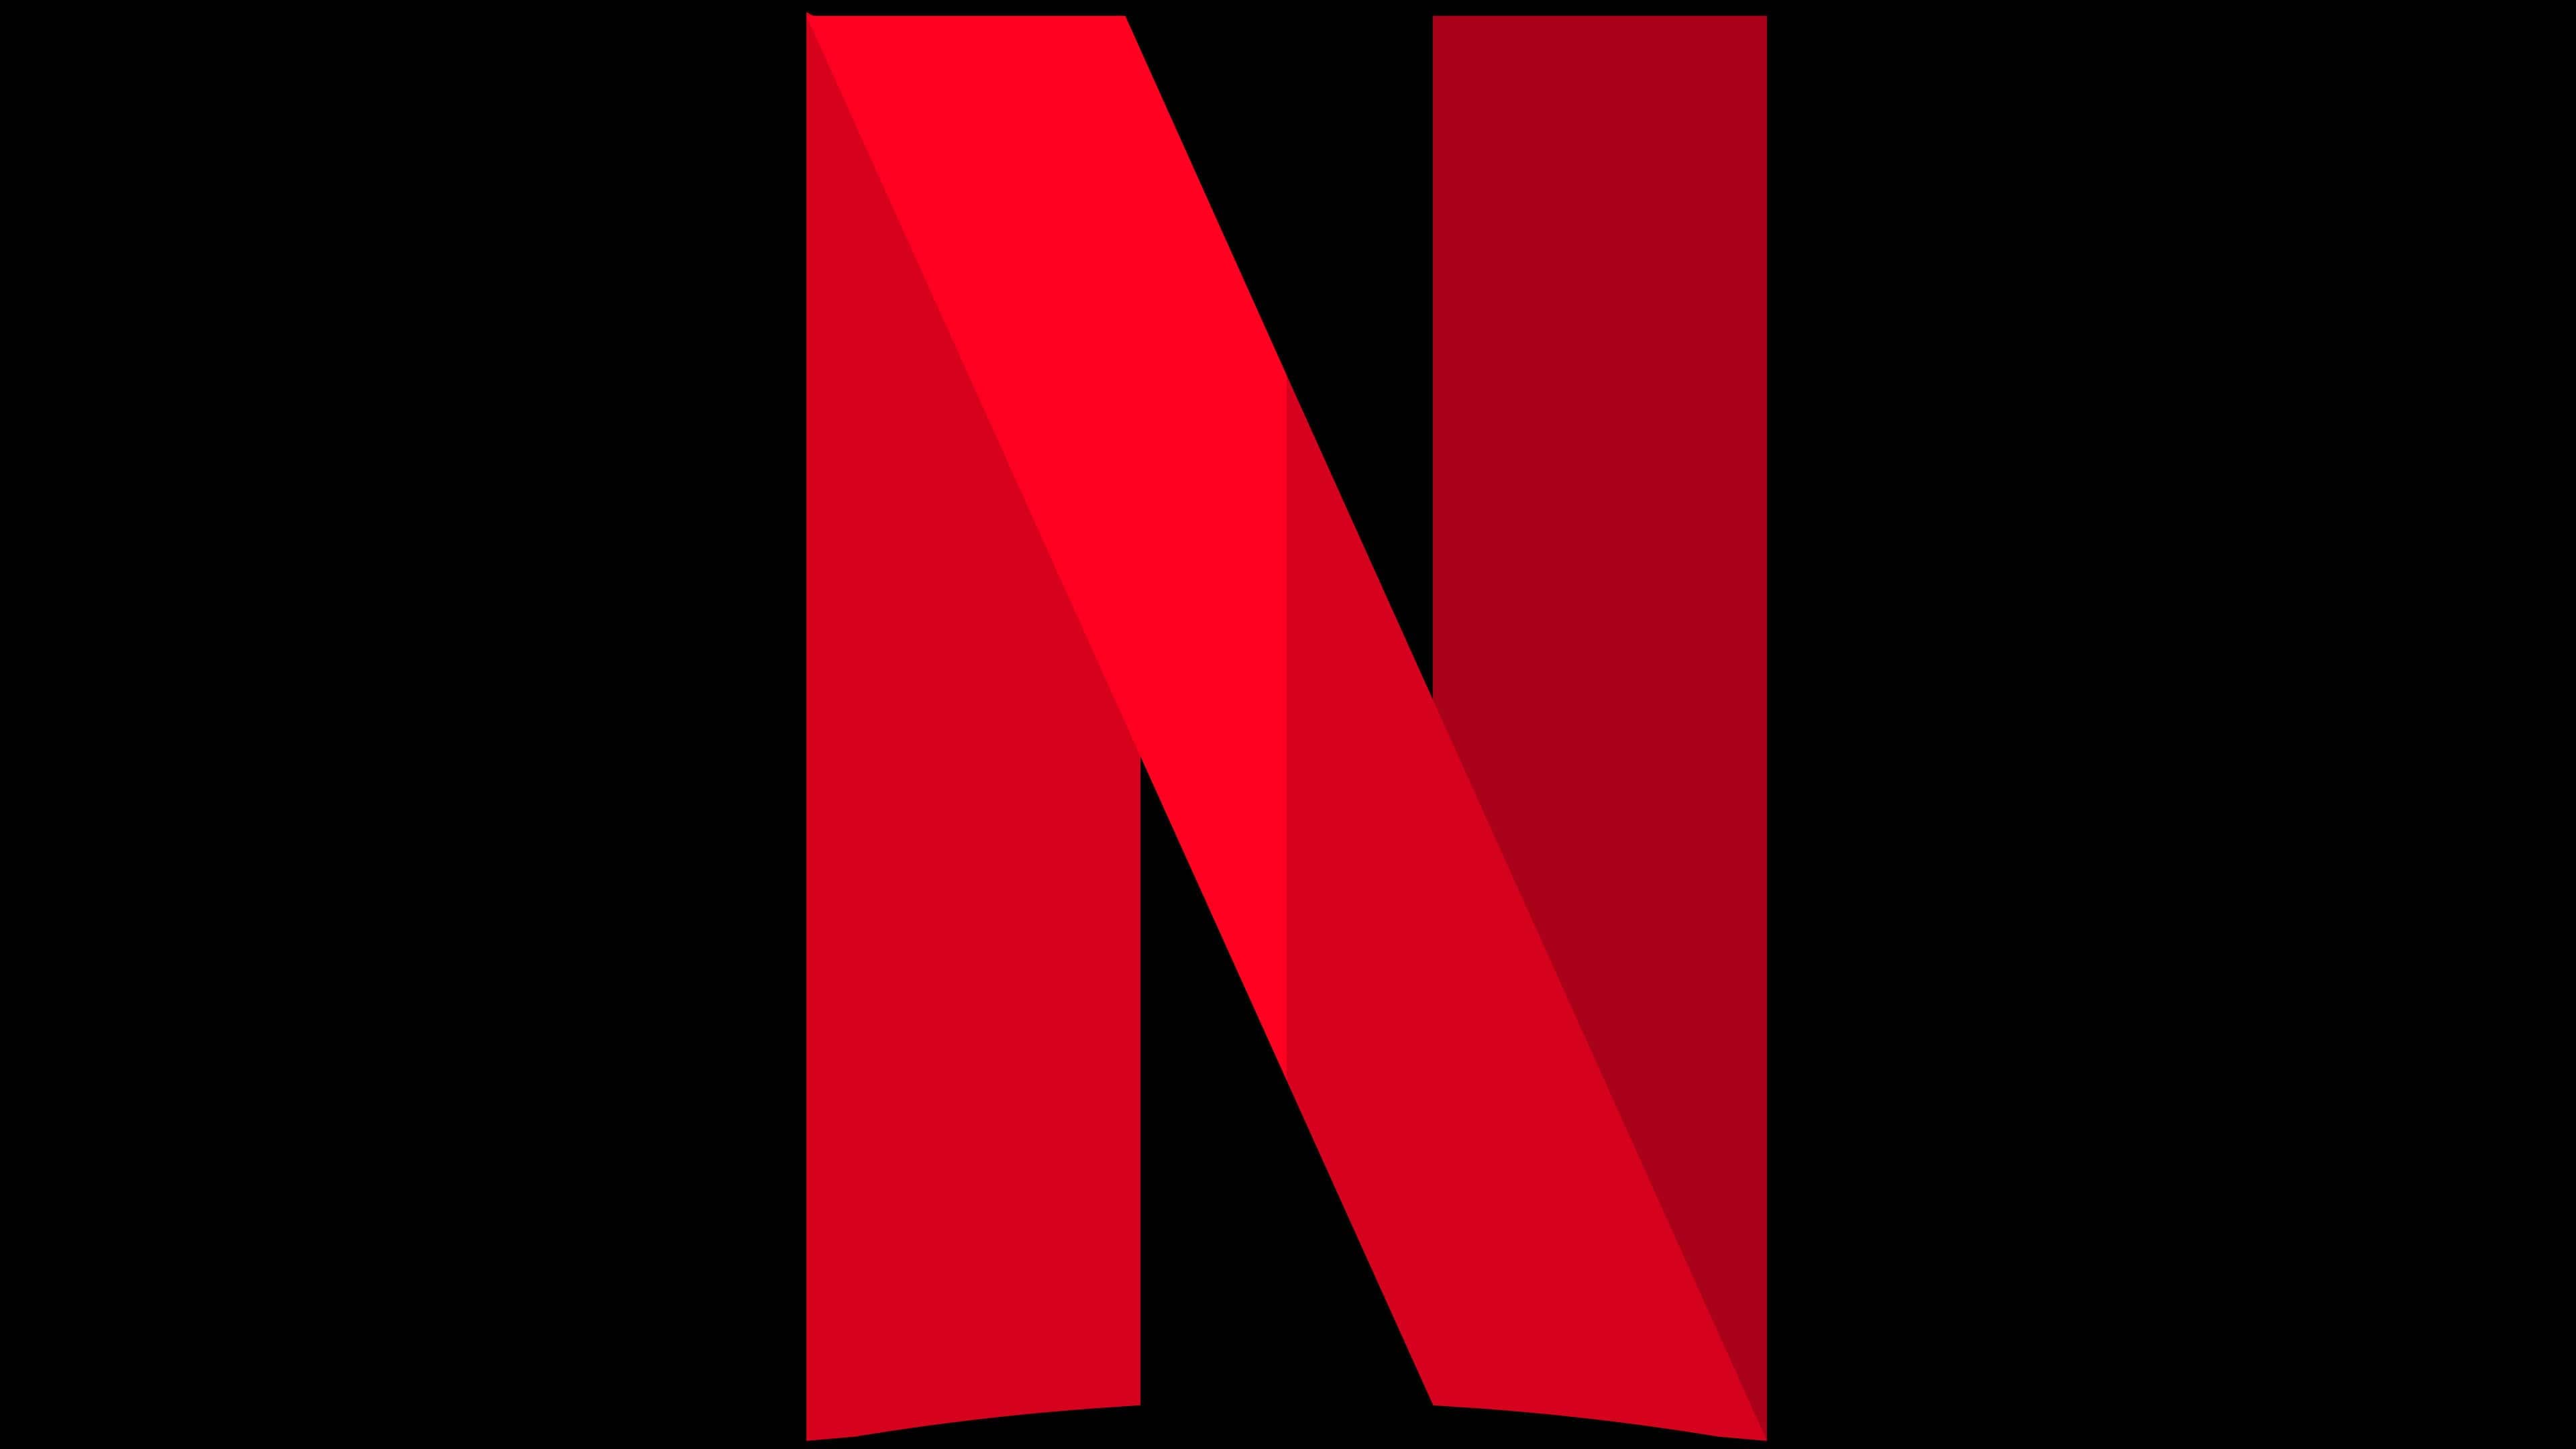 Image for Less than 1% of Netflix subscribers play its games daily